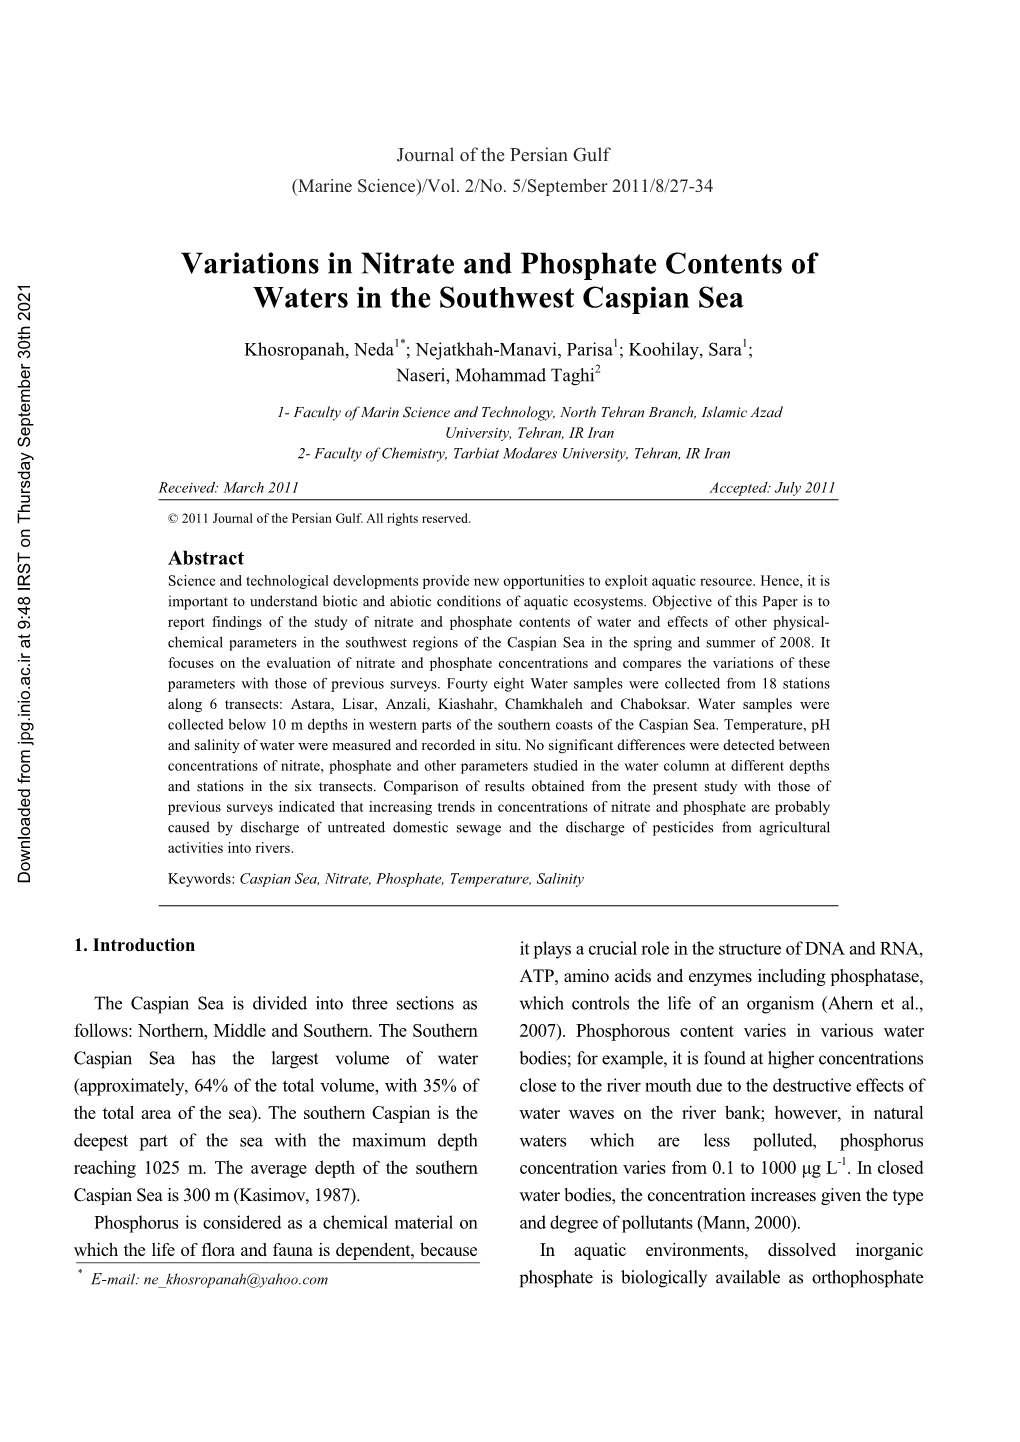 Variations in Nitrate and Phosphate Contents of Waters in the Southwest Caspian Sea